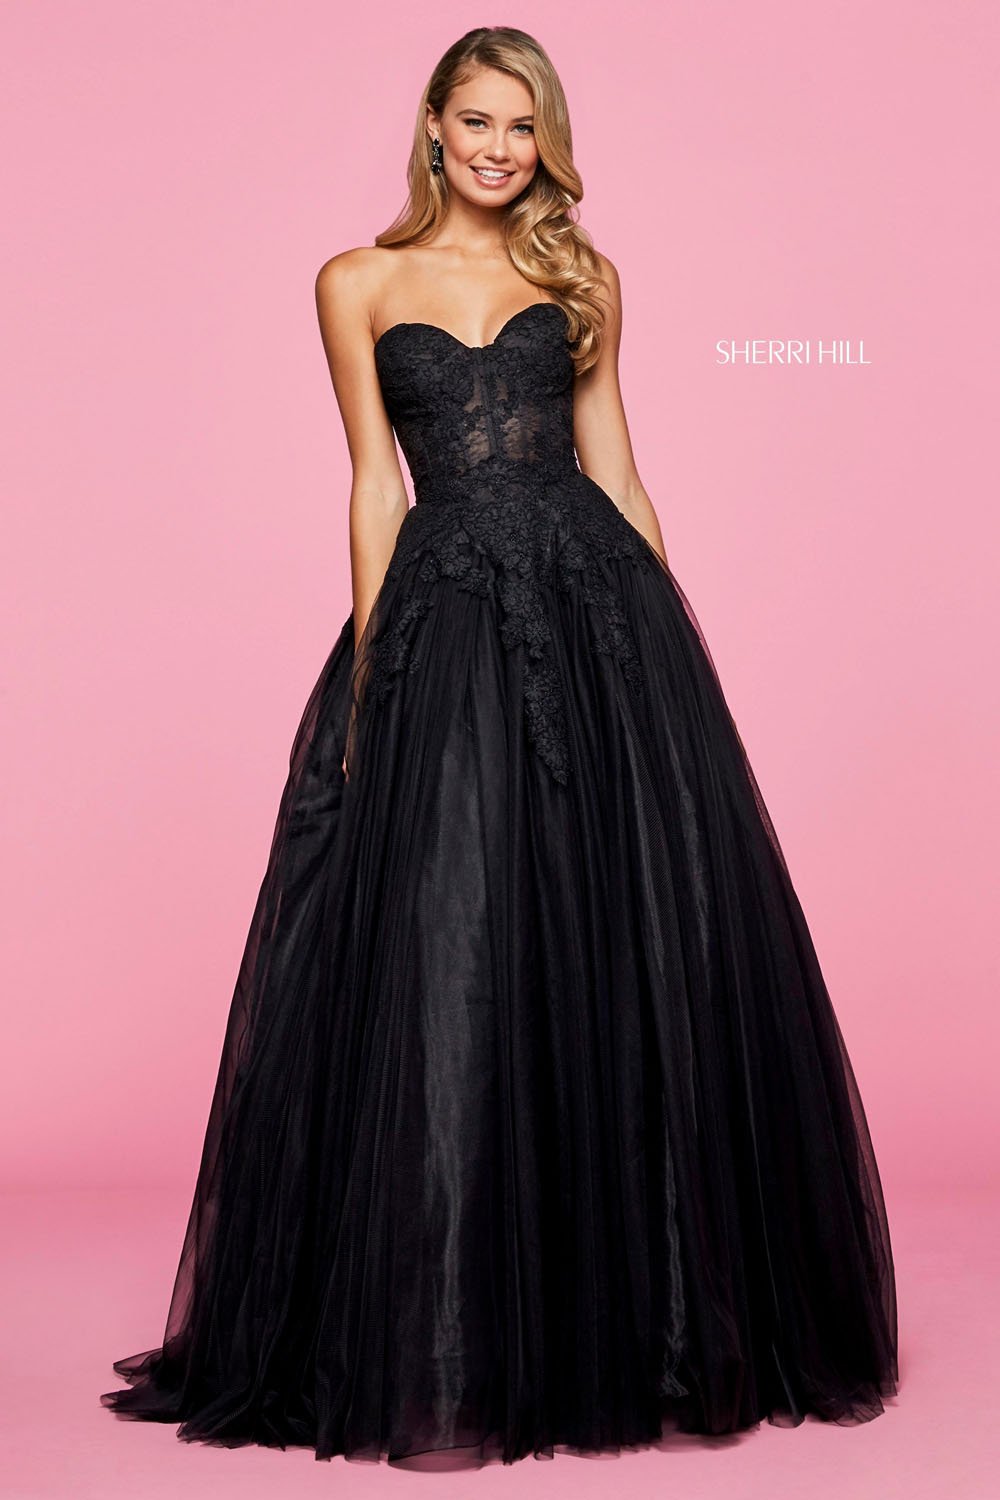 Sherri Hill 53503 dress images in these colors: Black, Navy, Fuchsia, Red, Black Ivory, Blush.